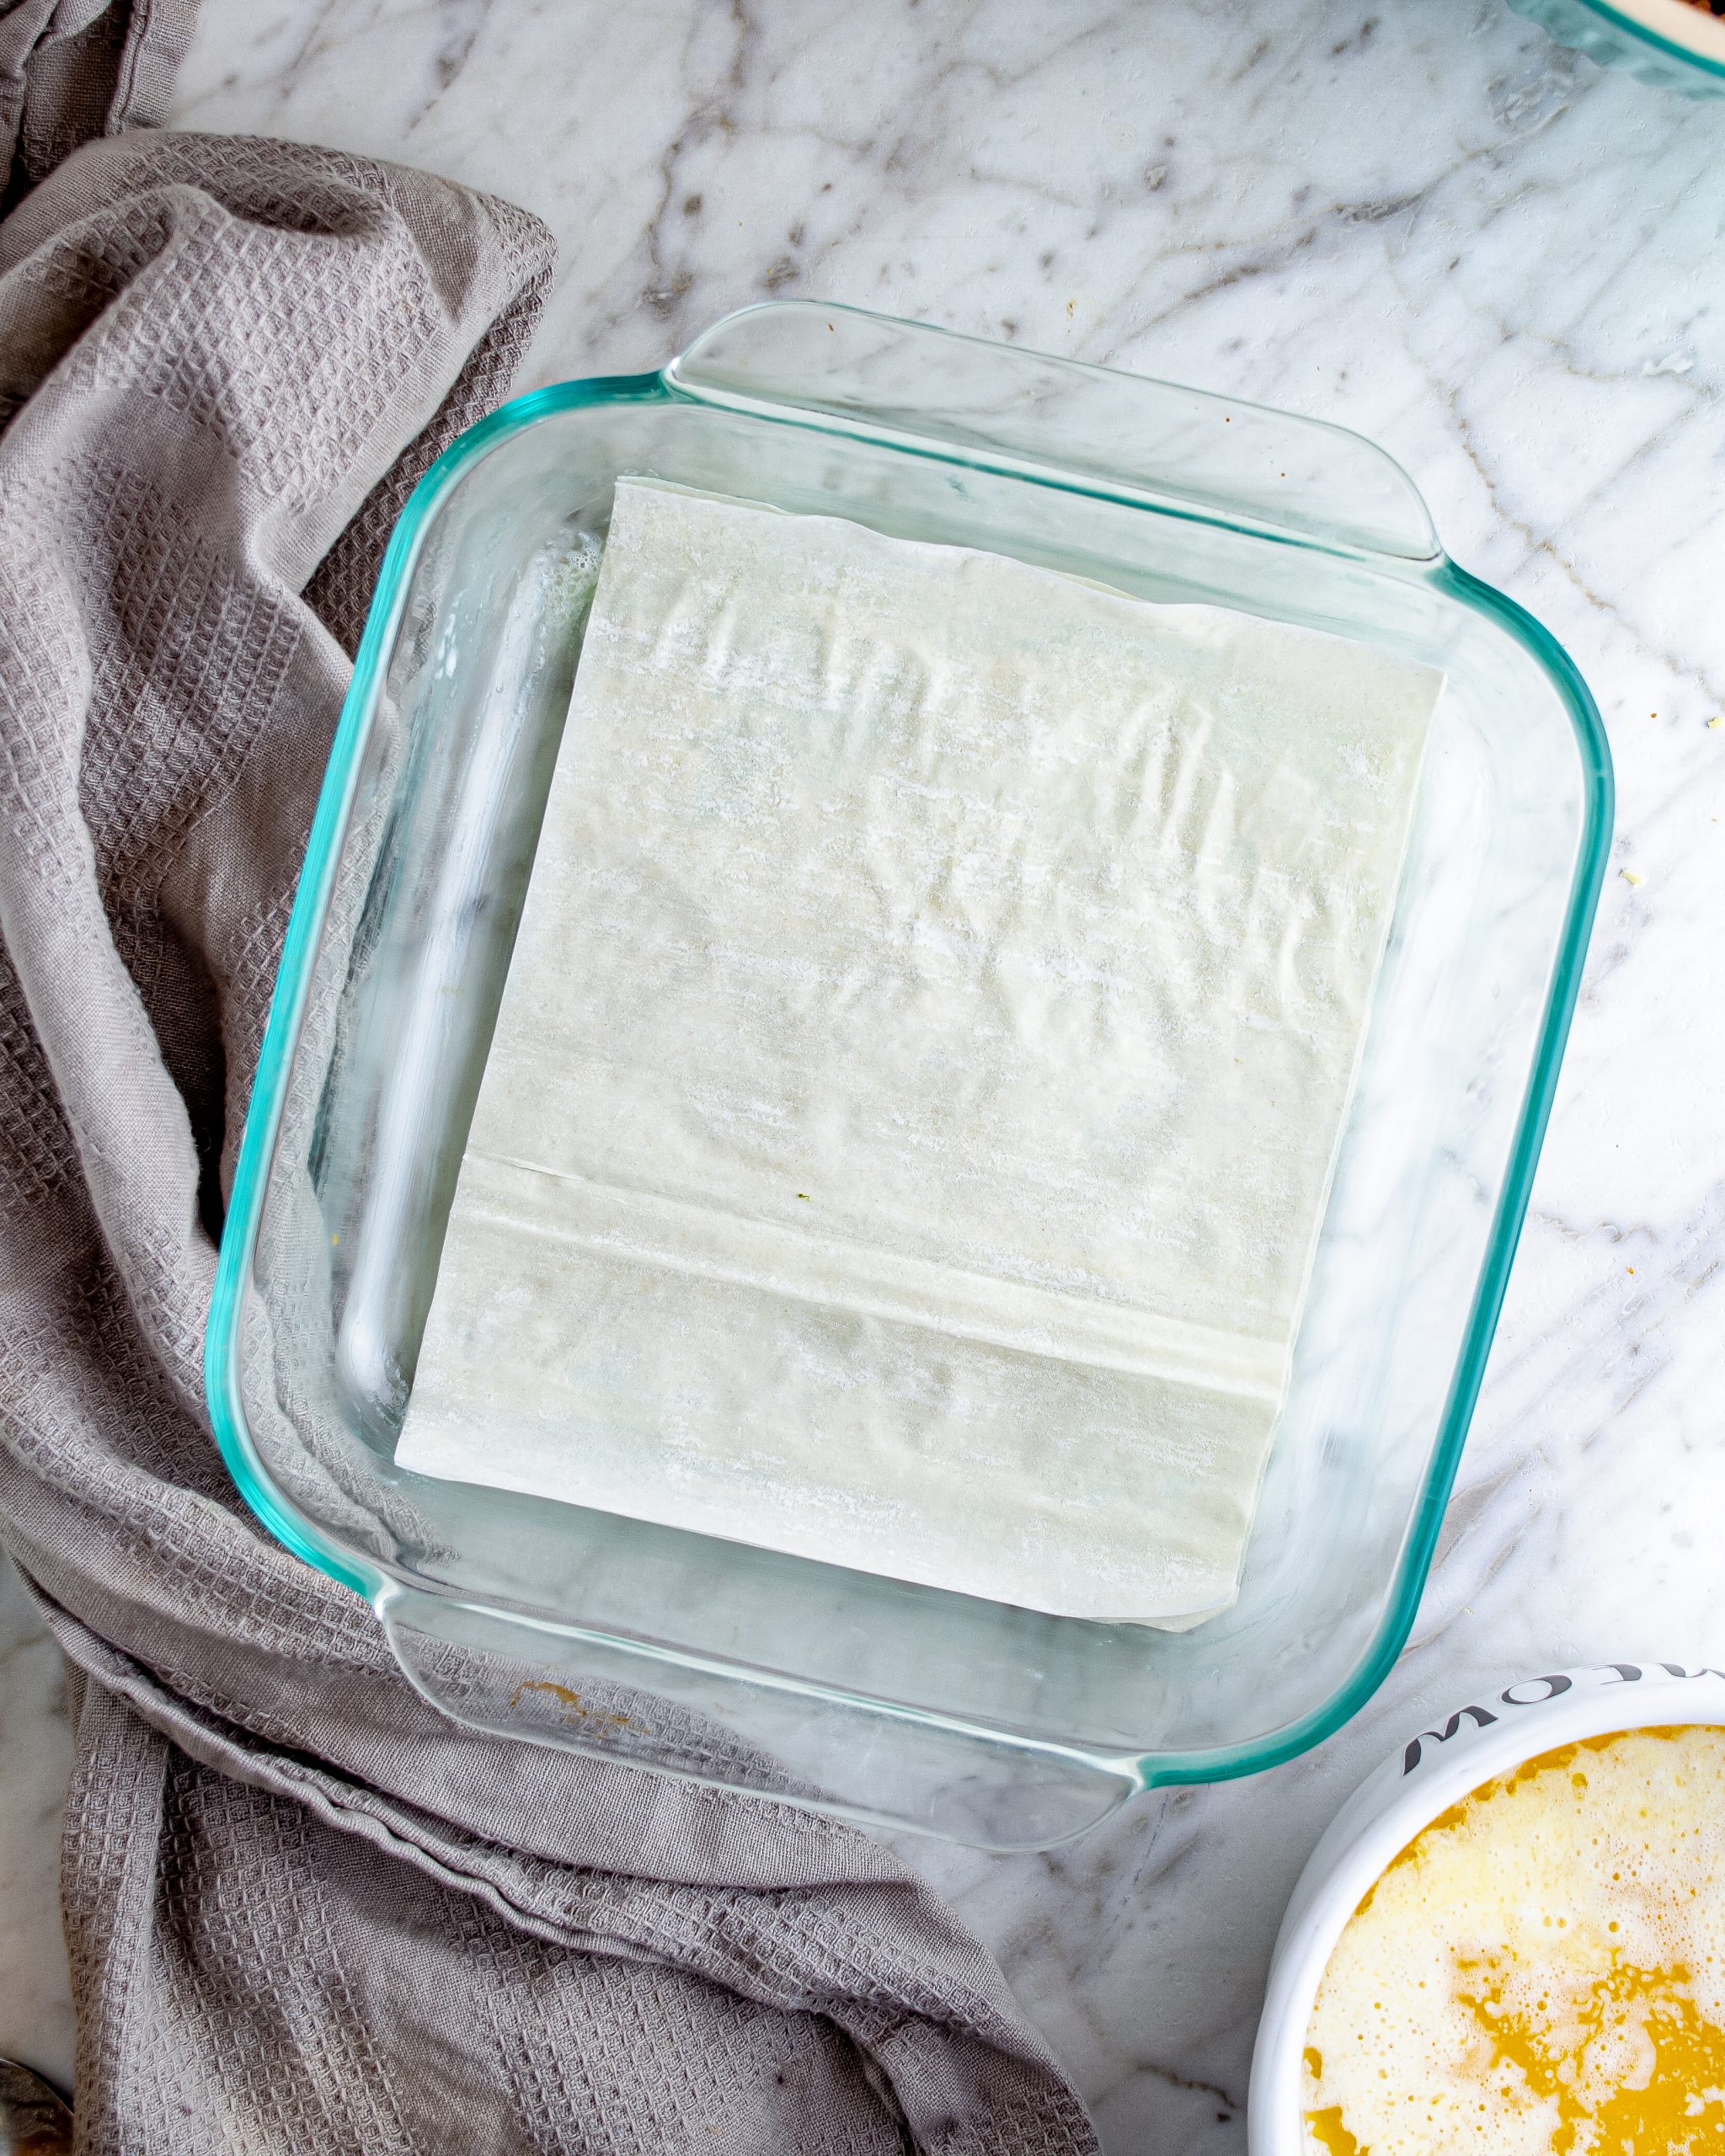 Place a layer of phyllo dough into the bottom of the baking dish.